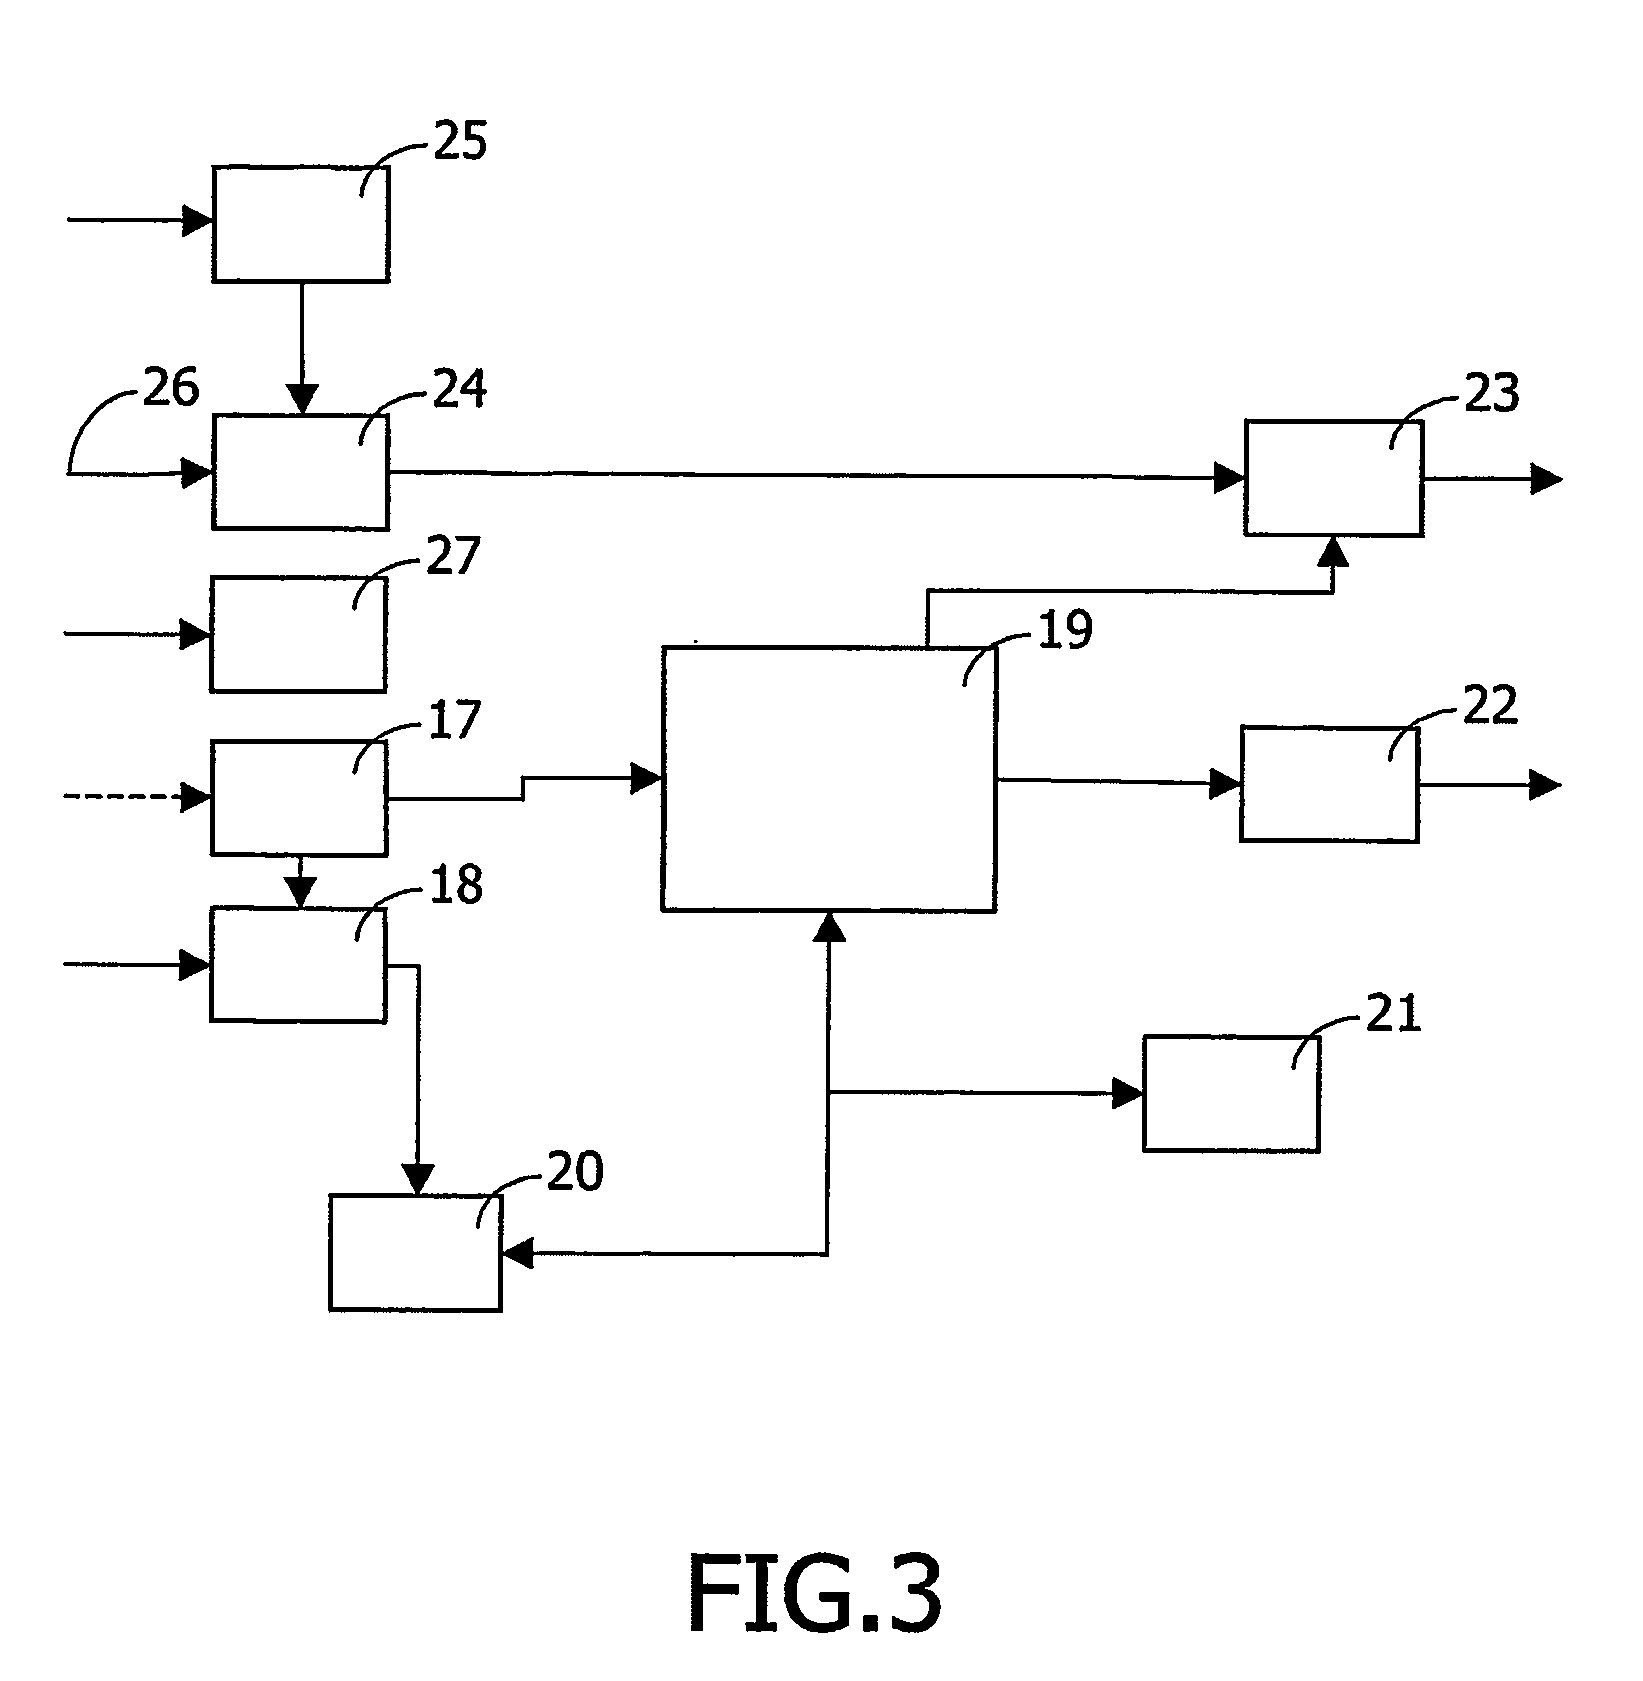 Method of enabling the programming of a universal remote control system